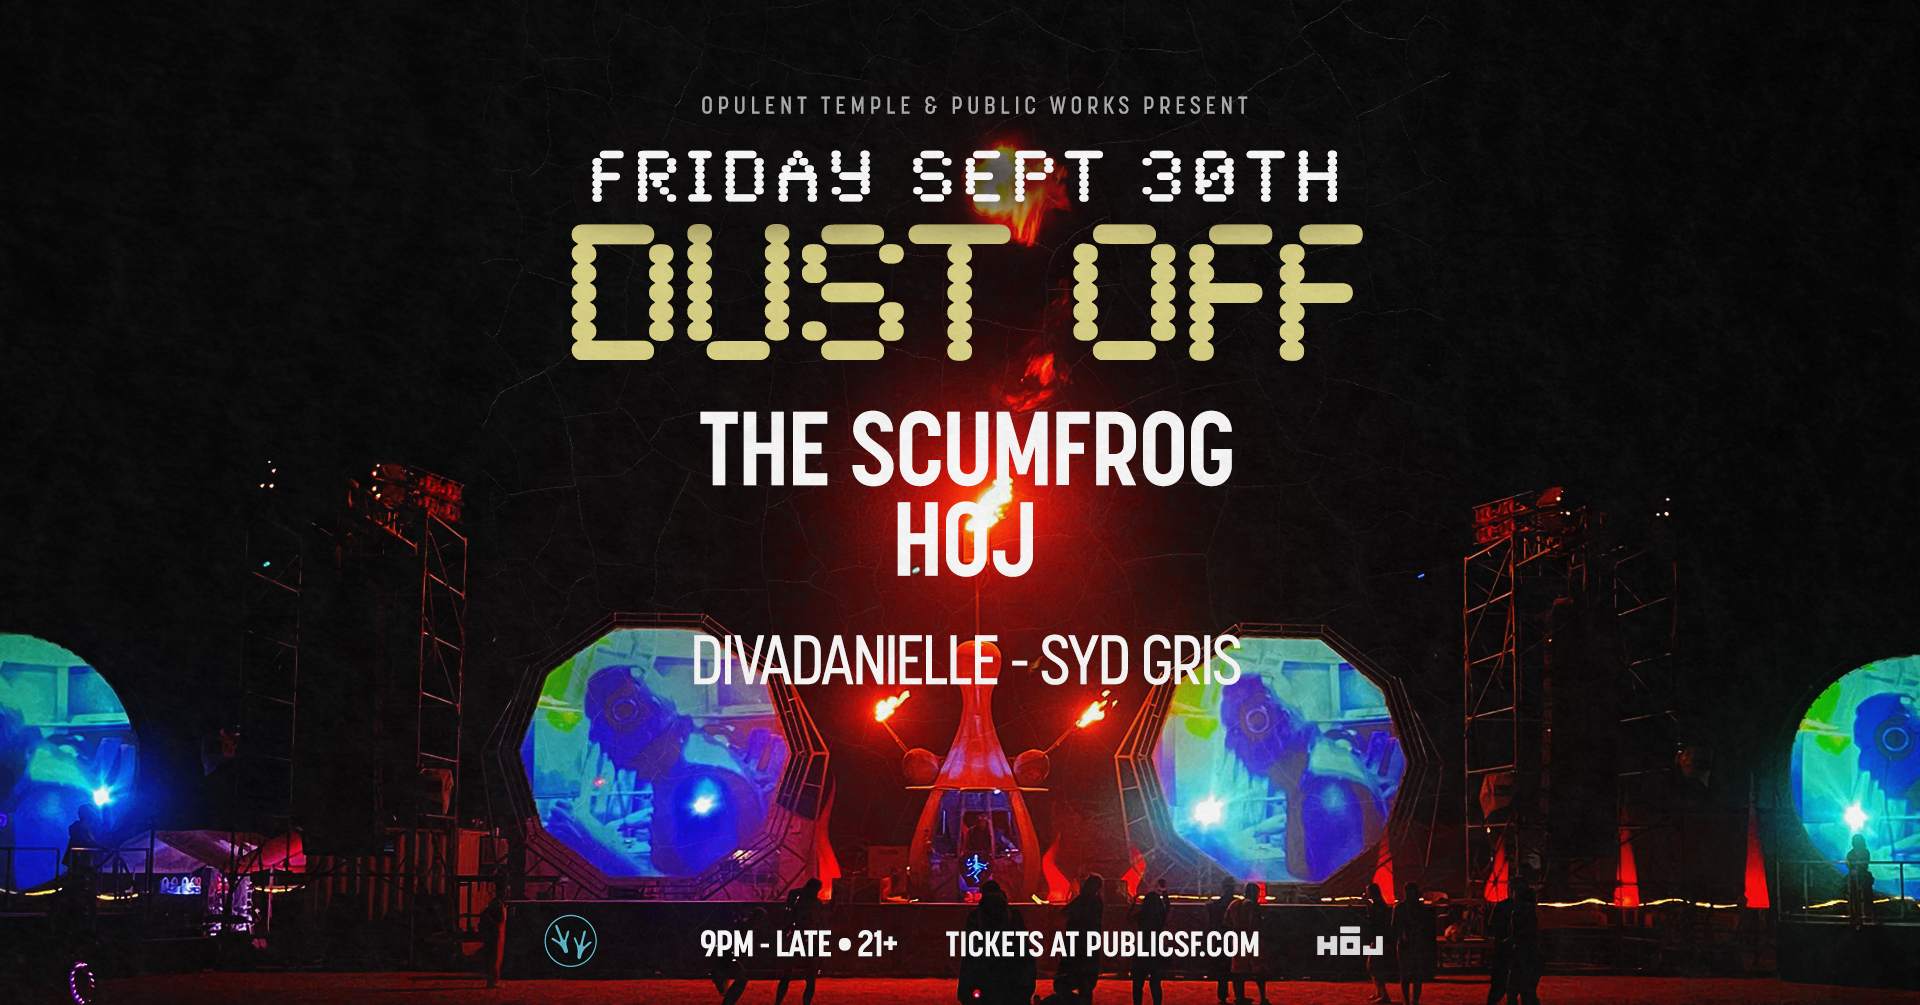 Dust Off with The Scumfrog, Hoj, divaDanielle & Syd Gris - フライヤー表